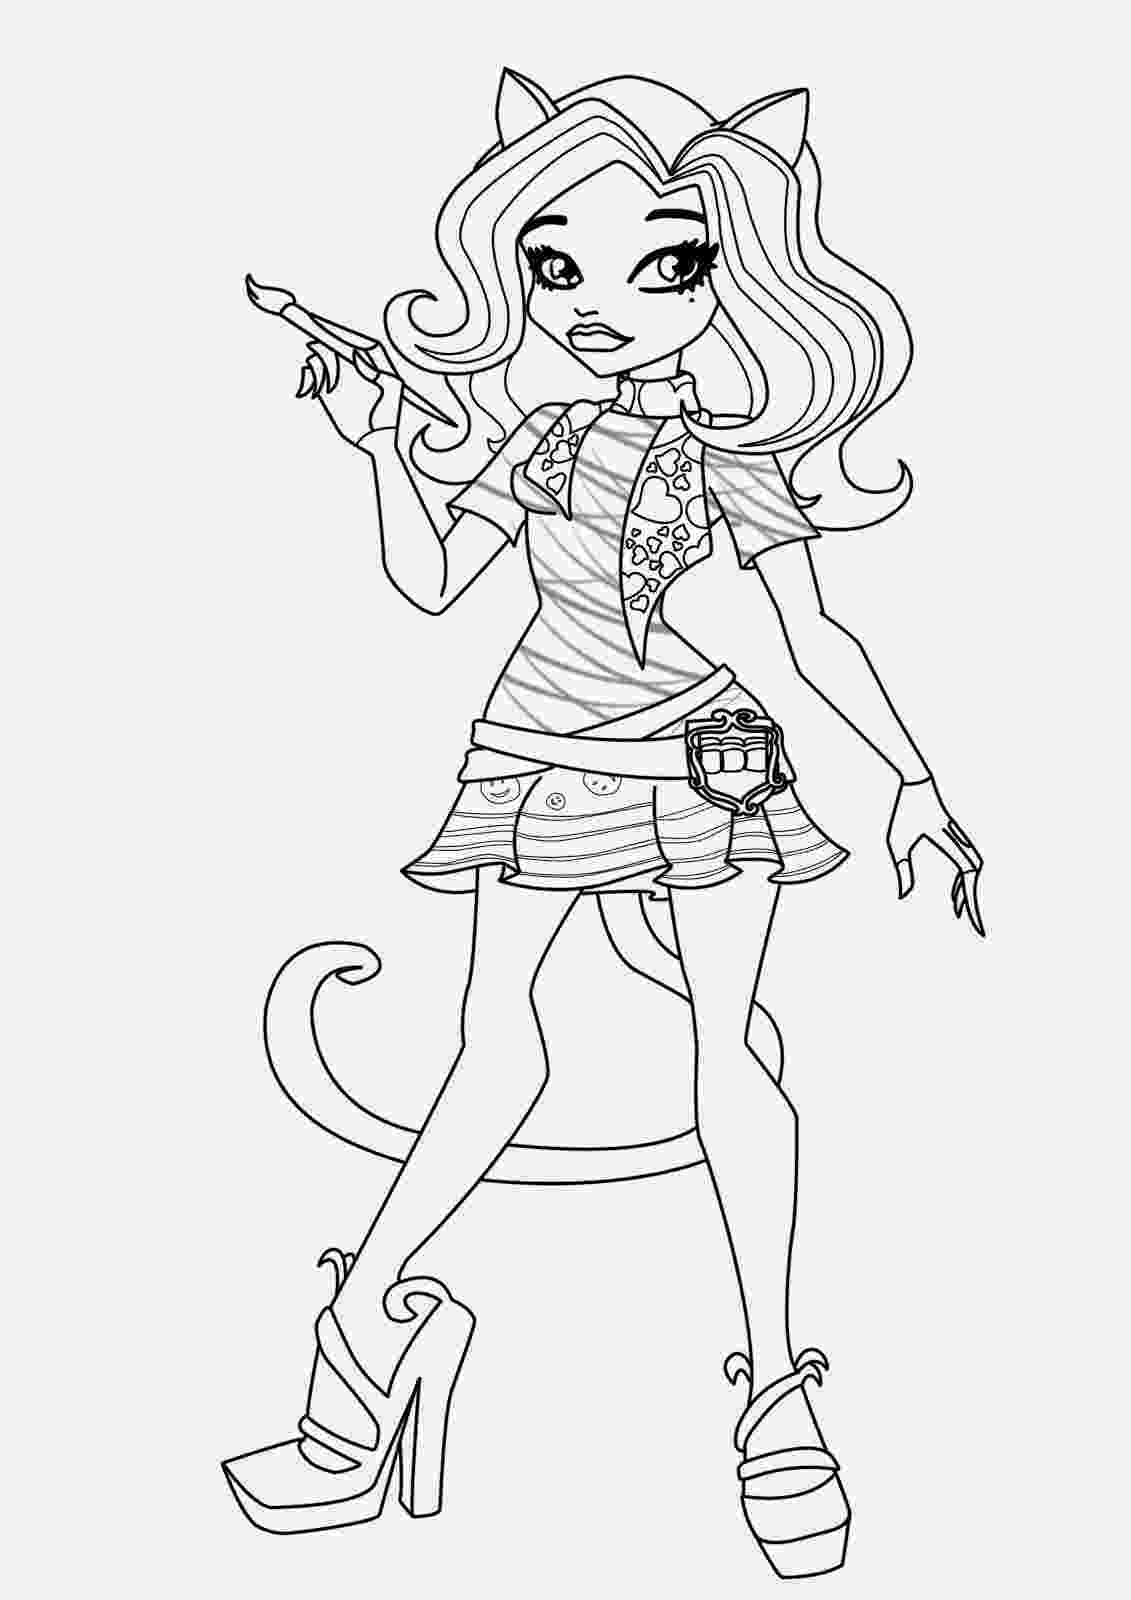 coloring page monster high coloring pages monster high coloring pages free and printable high monster coloring page 